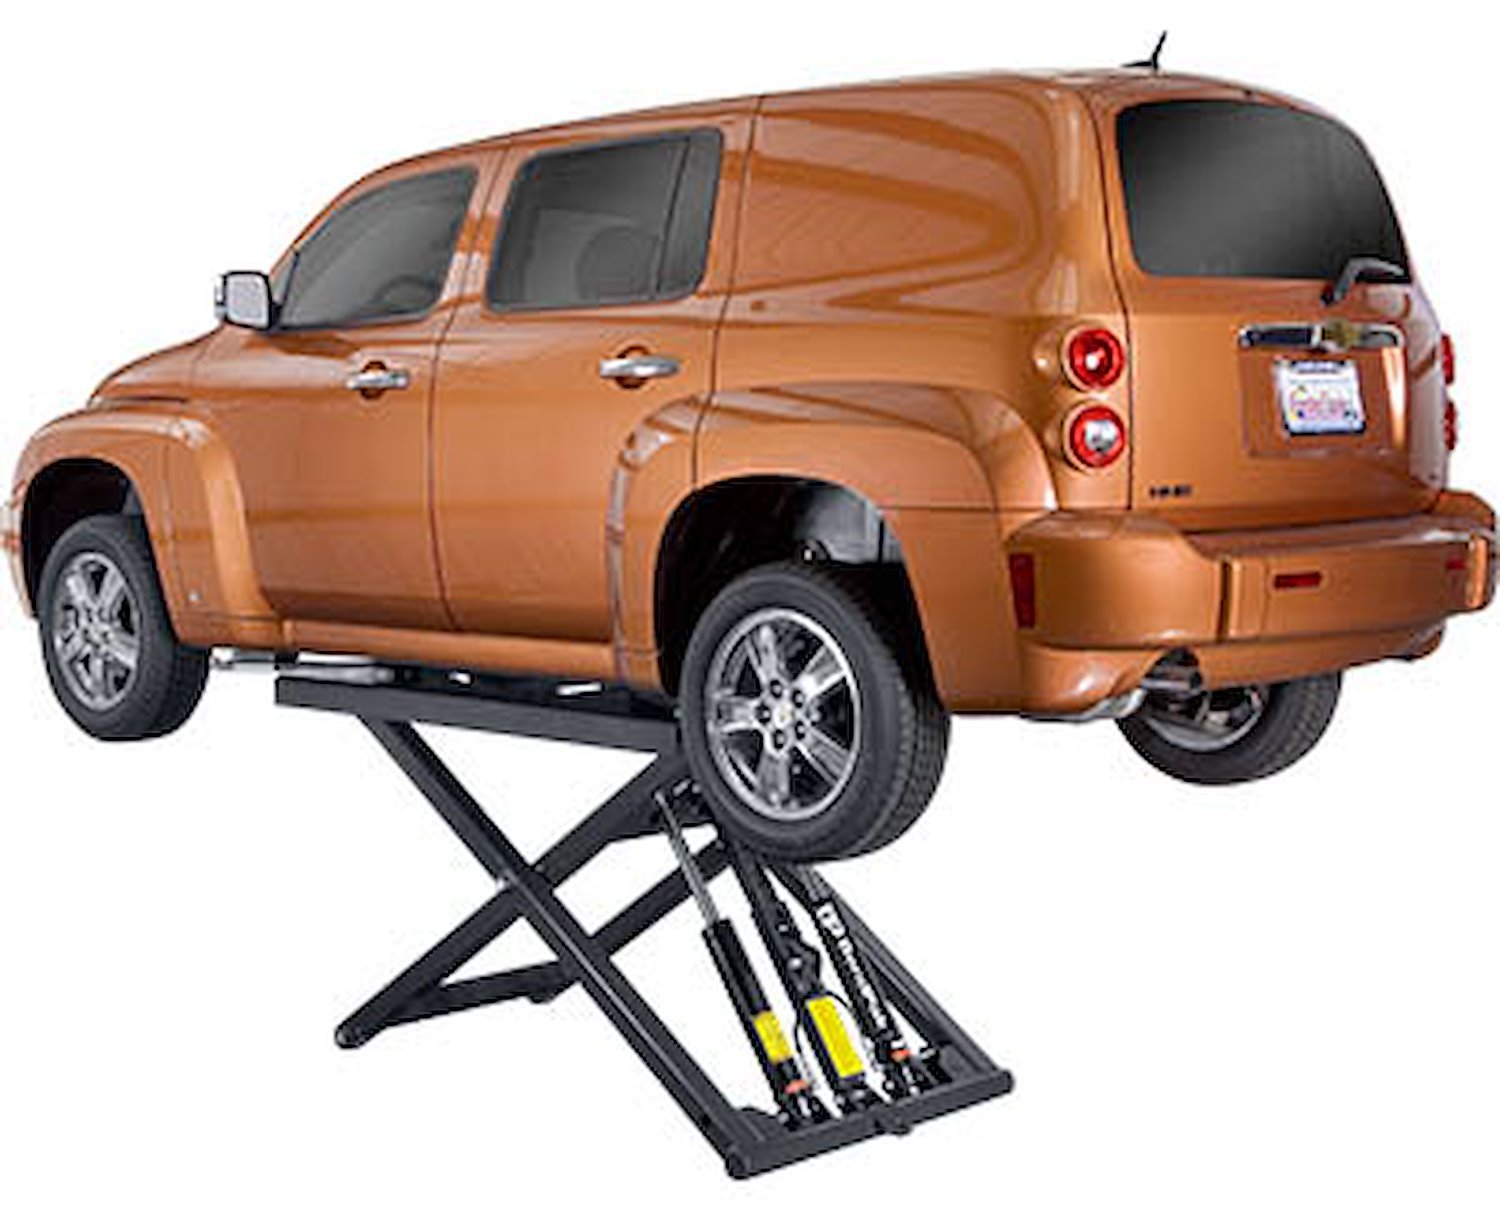 MD-6XP Portable Mid-Rise Scissor Vehicle Lift, 6,000 lbs. Capacity, 48 in. Max Rise